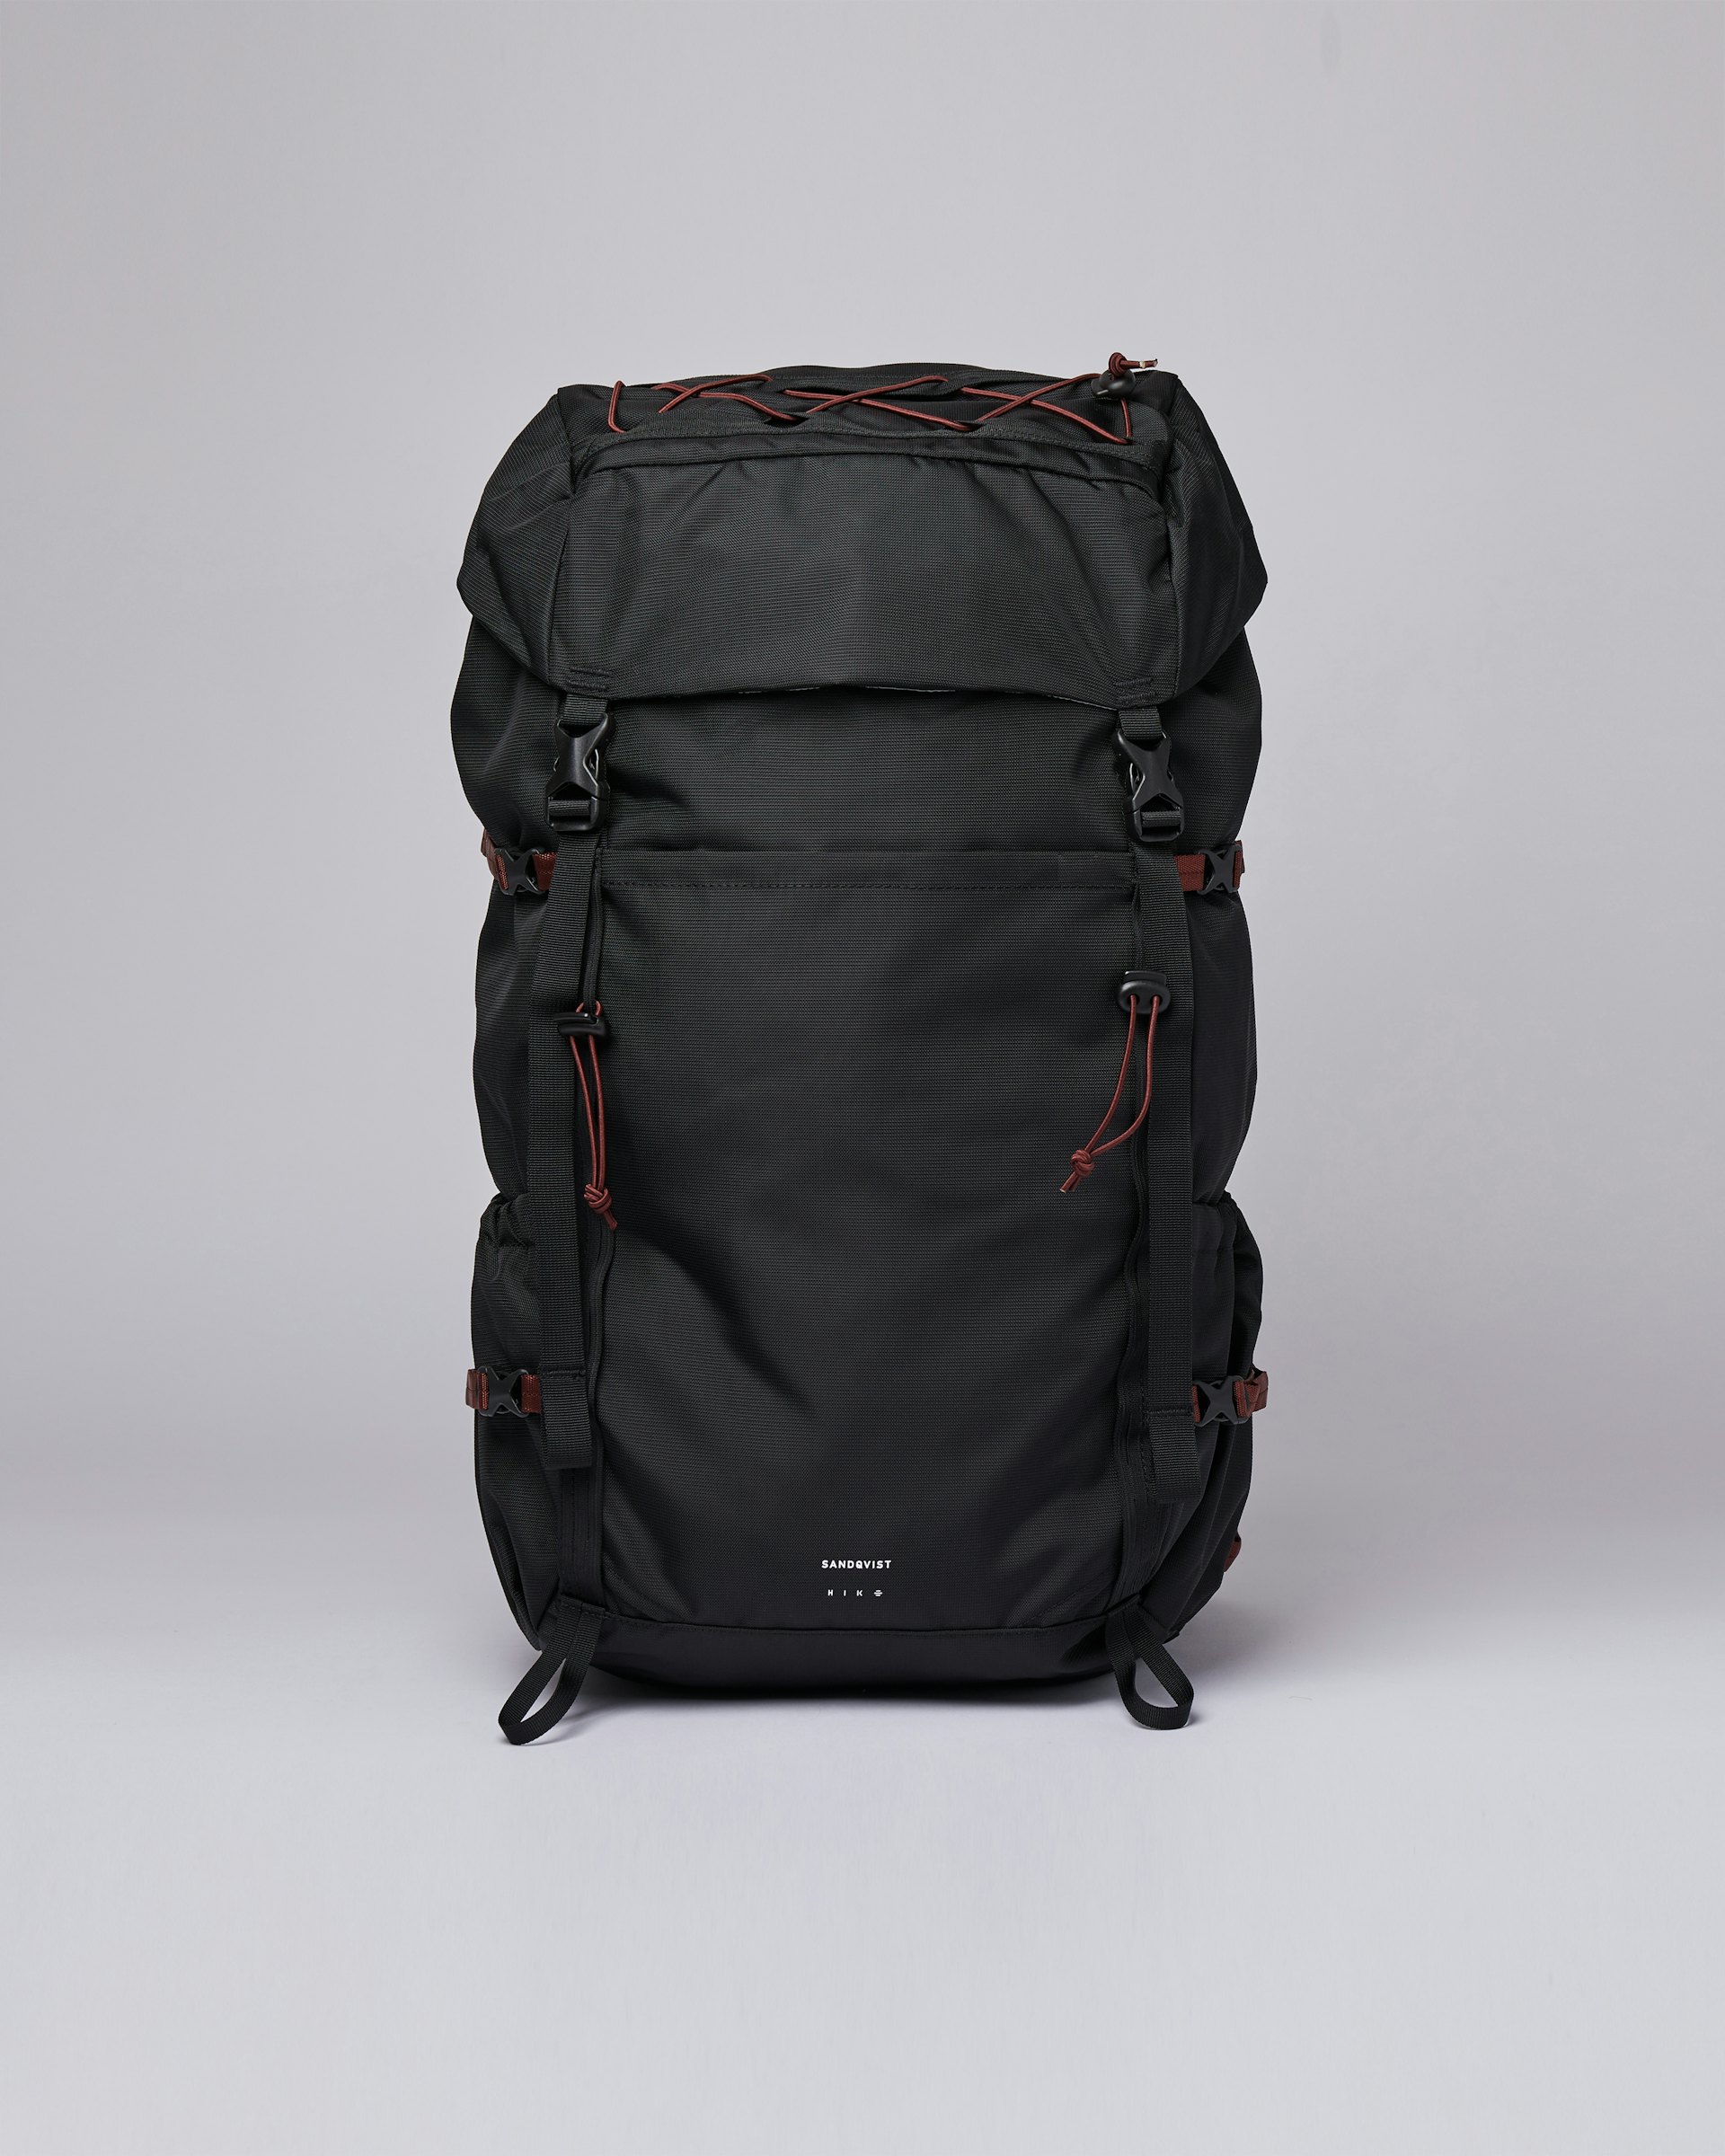 Mountain Hike belongs to the category Backpacks and is in color black (1 of 9)